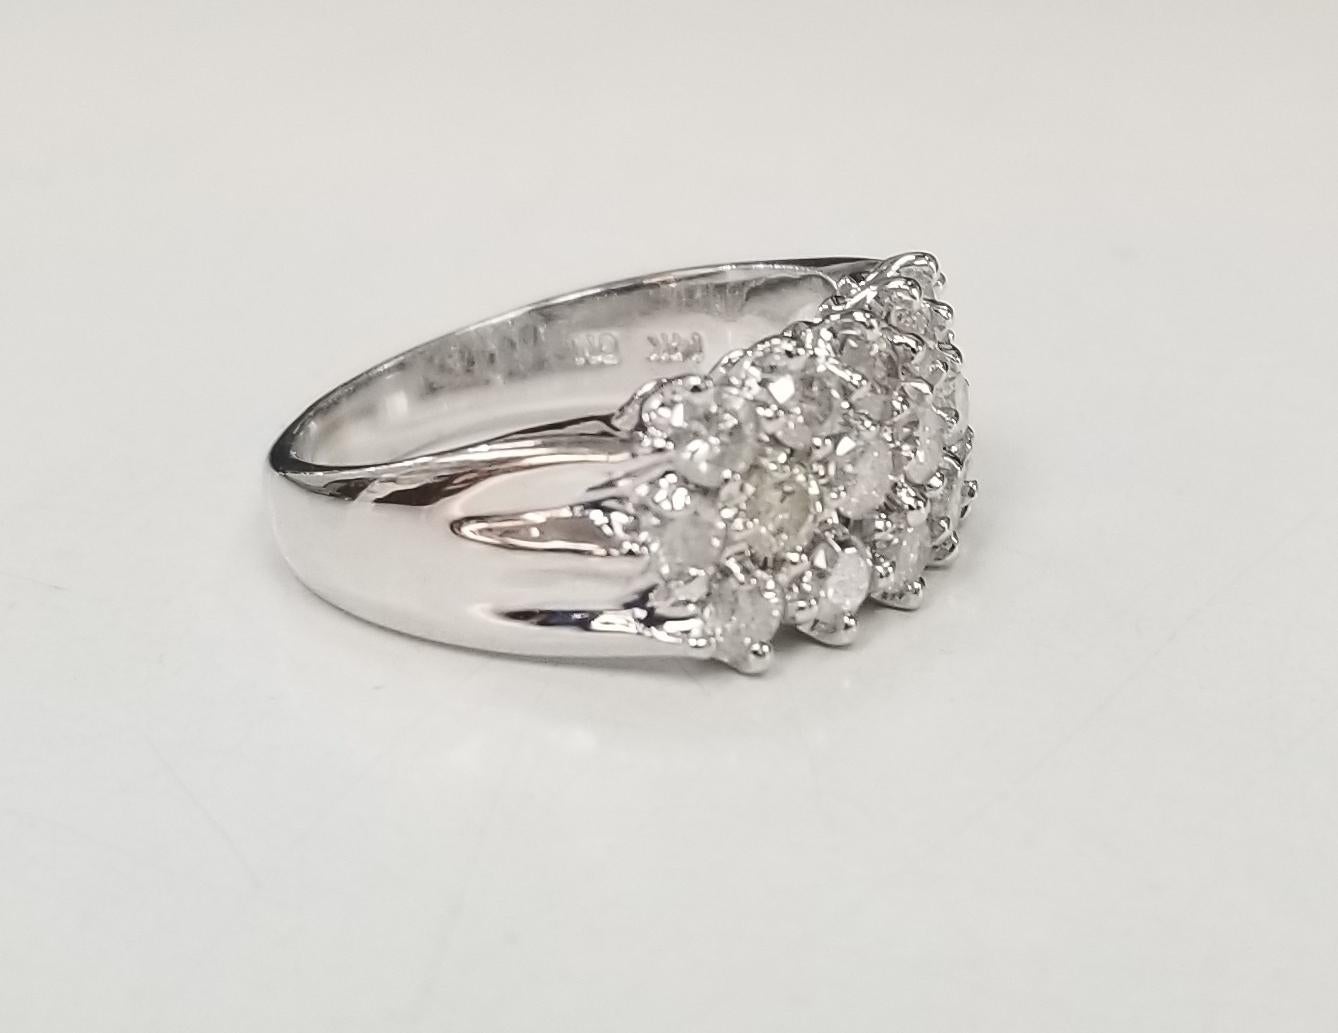 14k white gold diamond wedding ring 
Specifications:
    main stone: BRILLIANT CUT DIAMOND
    diamonds: 16 PIECES
    carat total weight: 1.17
    color: H
    clarity: SI2-I1 
    metal: white gold
    width: 3mm
    type: ring
    size: 6.25 US 